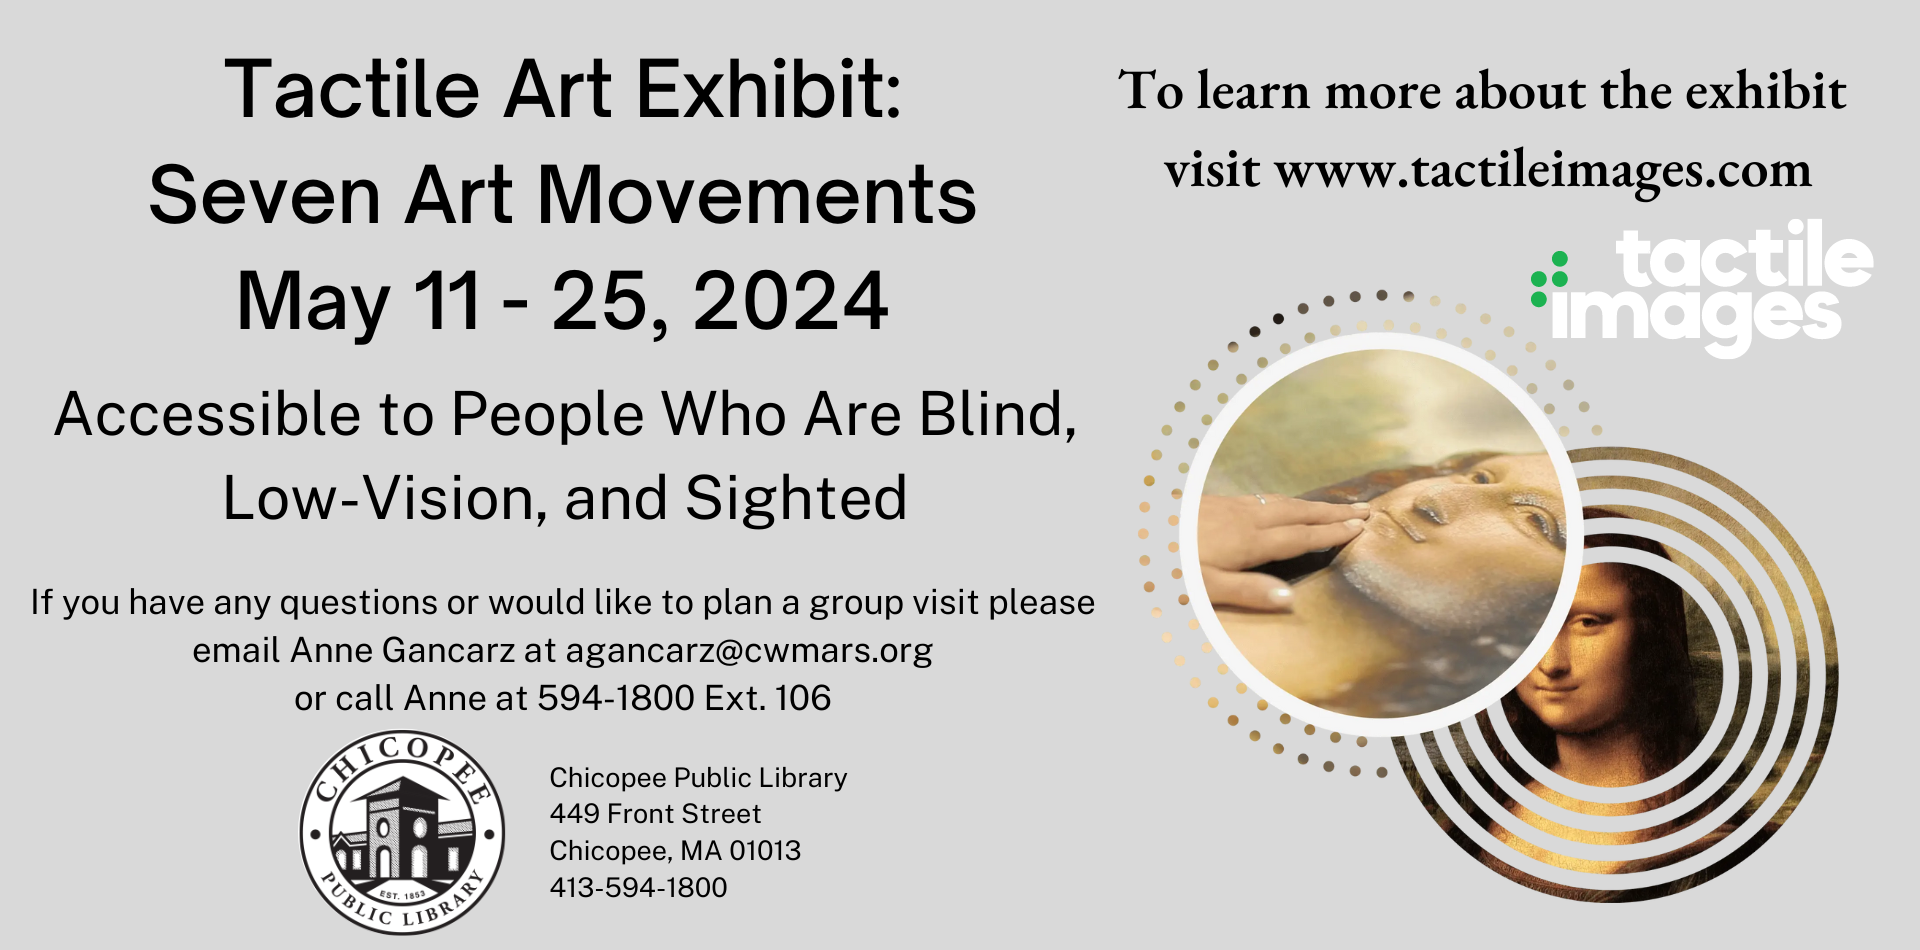 Tactile Art Exhibit: Seven Art Movements May 11 - 25, 2024 Accessible to People Who Are Blind, Low-Vision, and Sighted If you have any questions or would like to plan a group visit please email Anne Gancarz at agancarz@cwmars.org or call Anne at 594-1800 Ext. 106. To learn more about the exhibit visit www.tactileimages.com